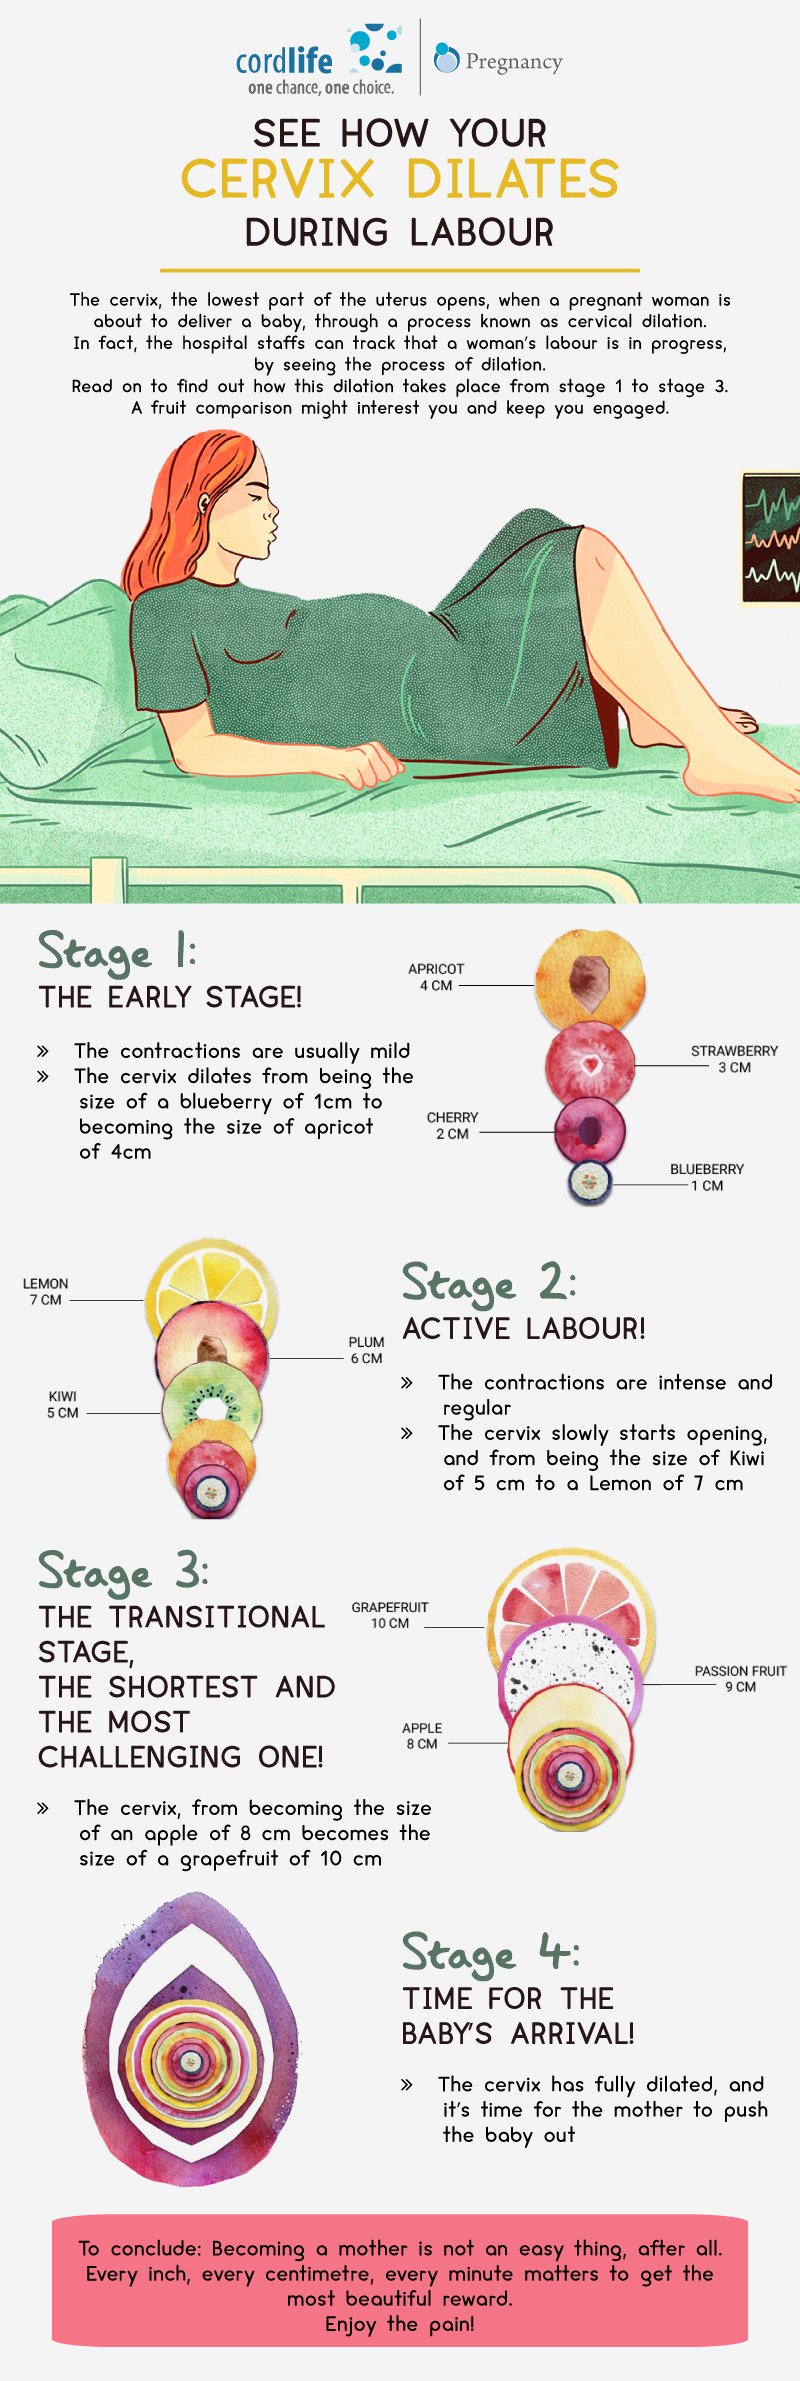 See how your cervix dilates during labour